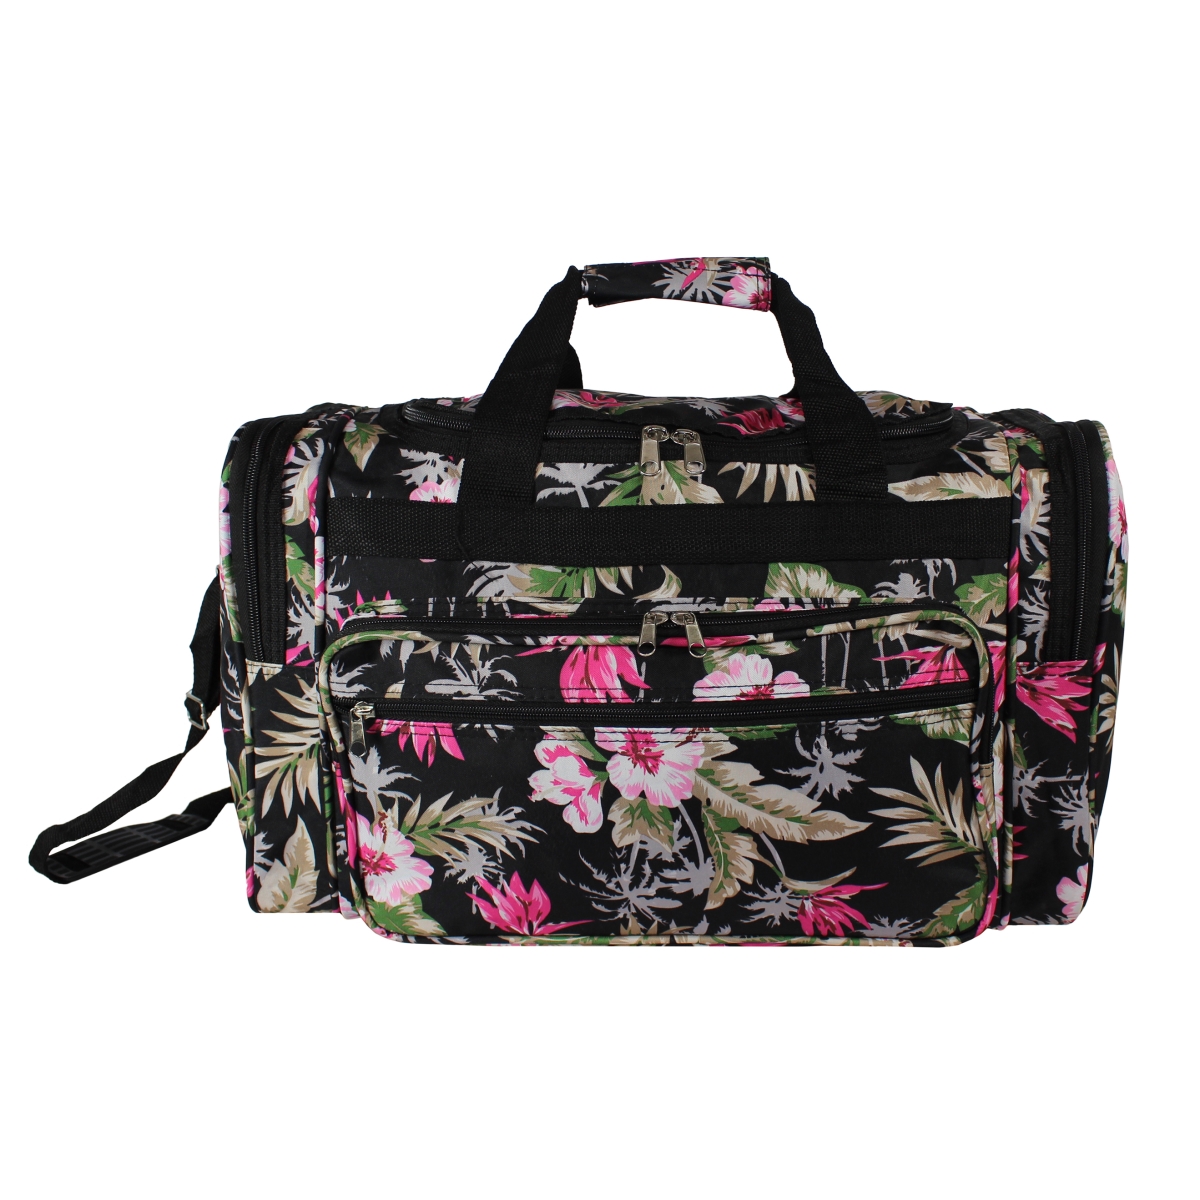 81t22-228 22 In. Carry-on Duffel Bag - Tropical Flowers